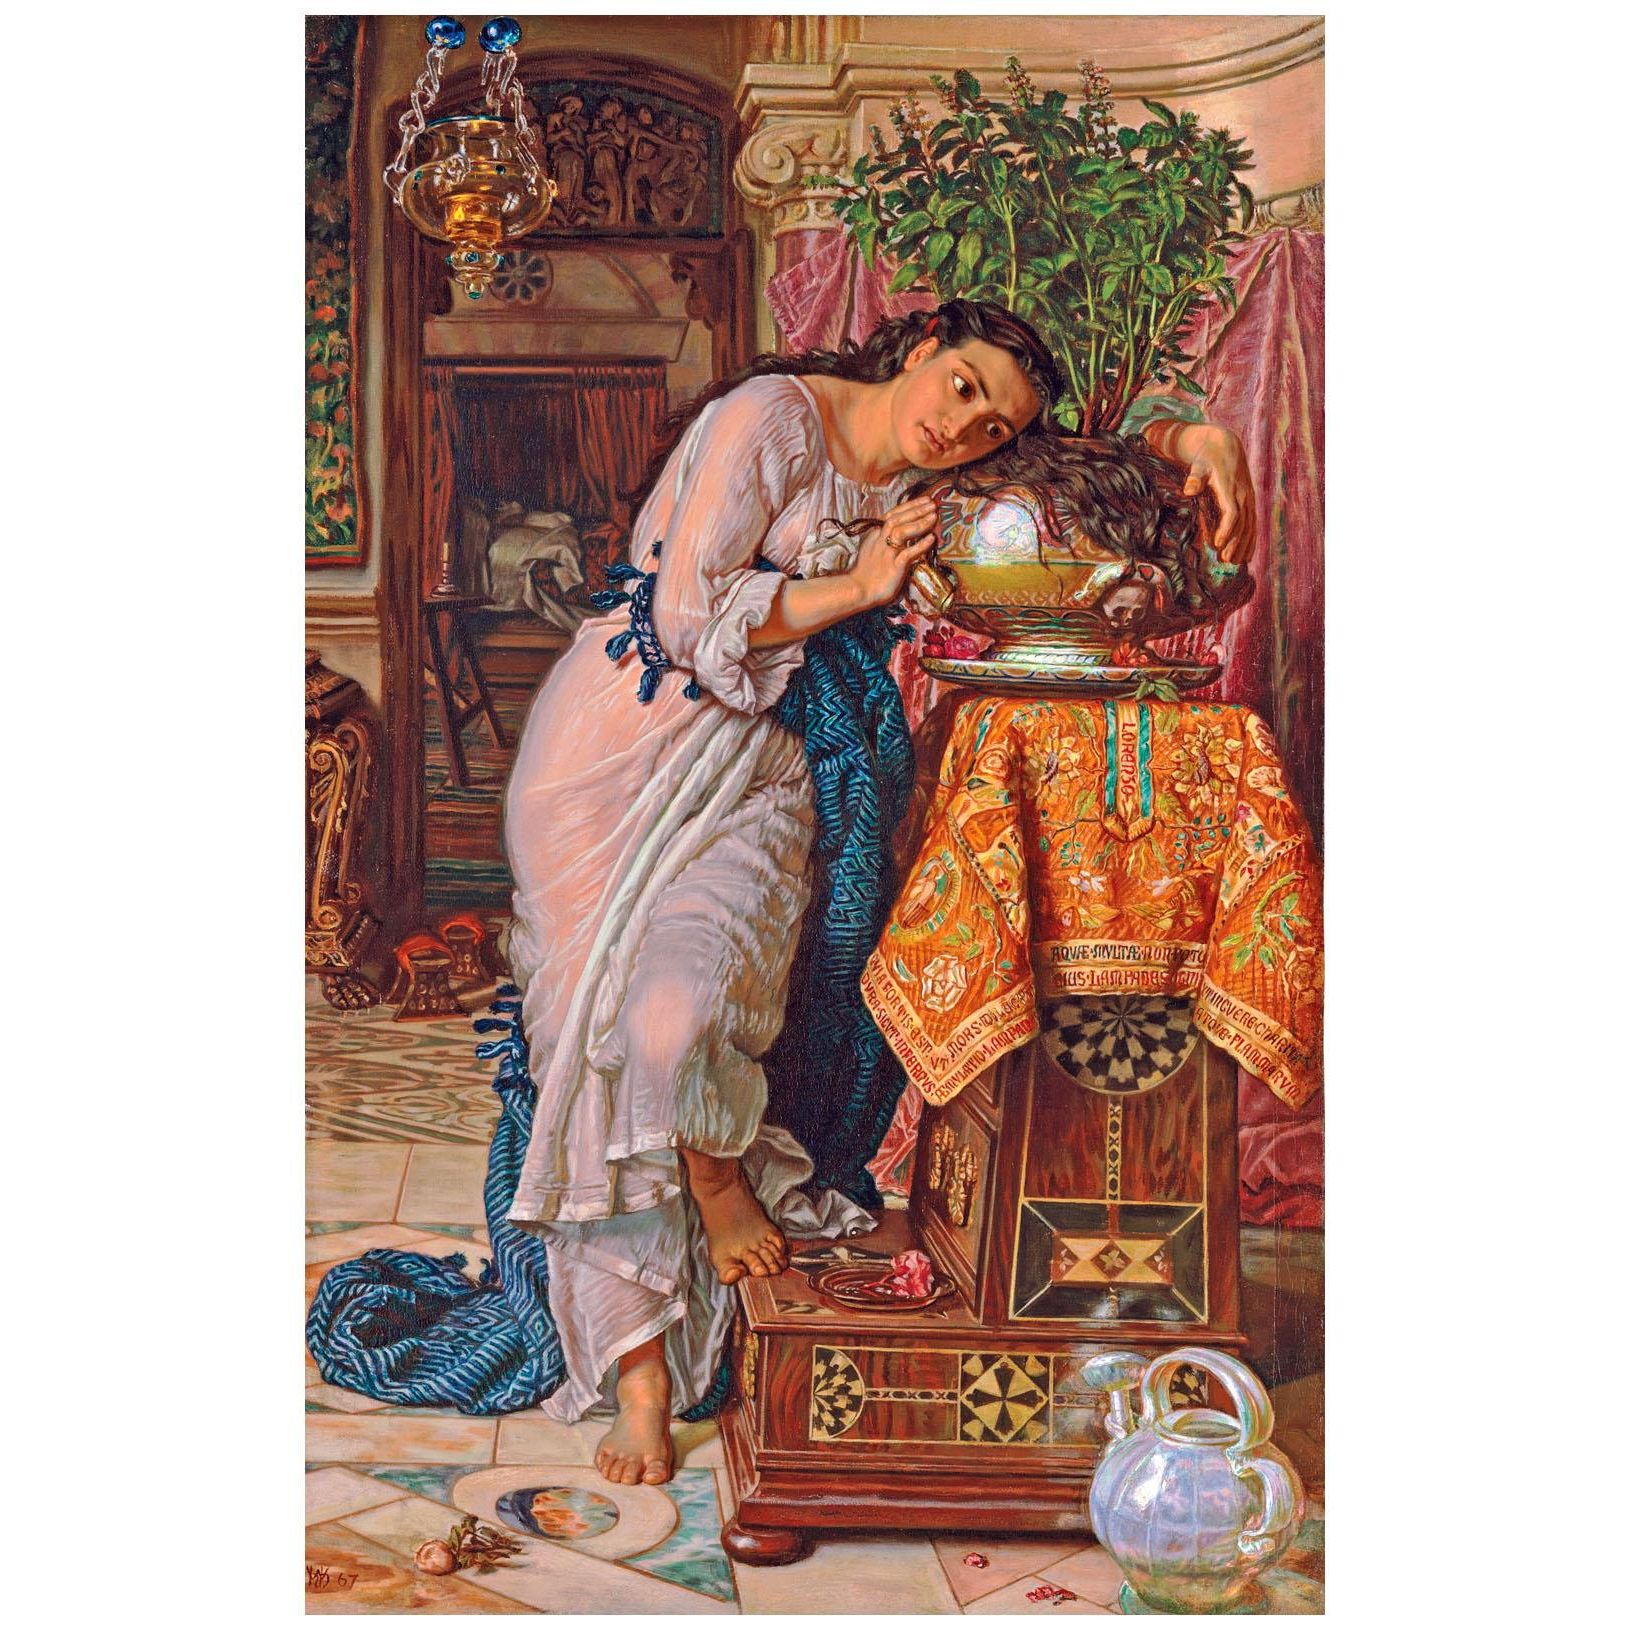 William Hunt. Isabella and the Pot of Basil. 1867. Laing Art Gallery Newcaslte